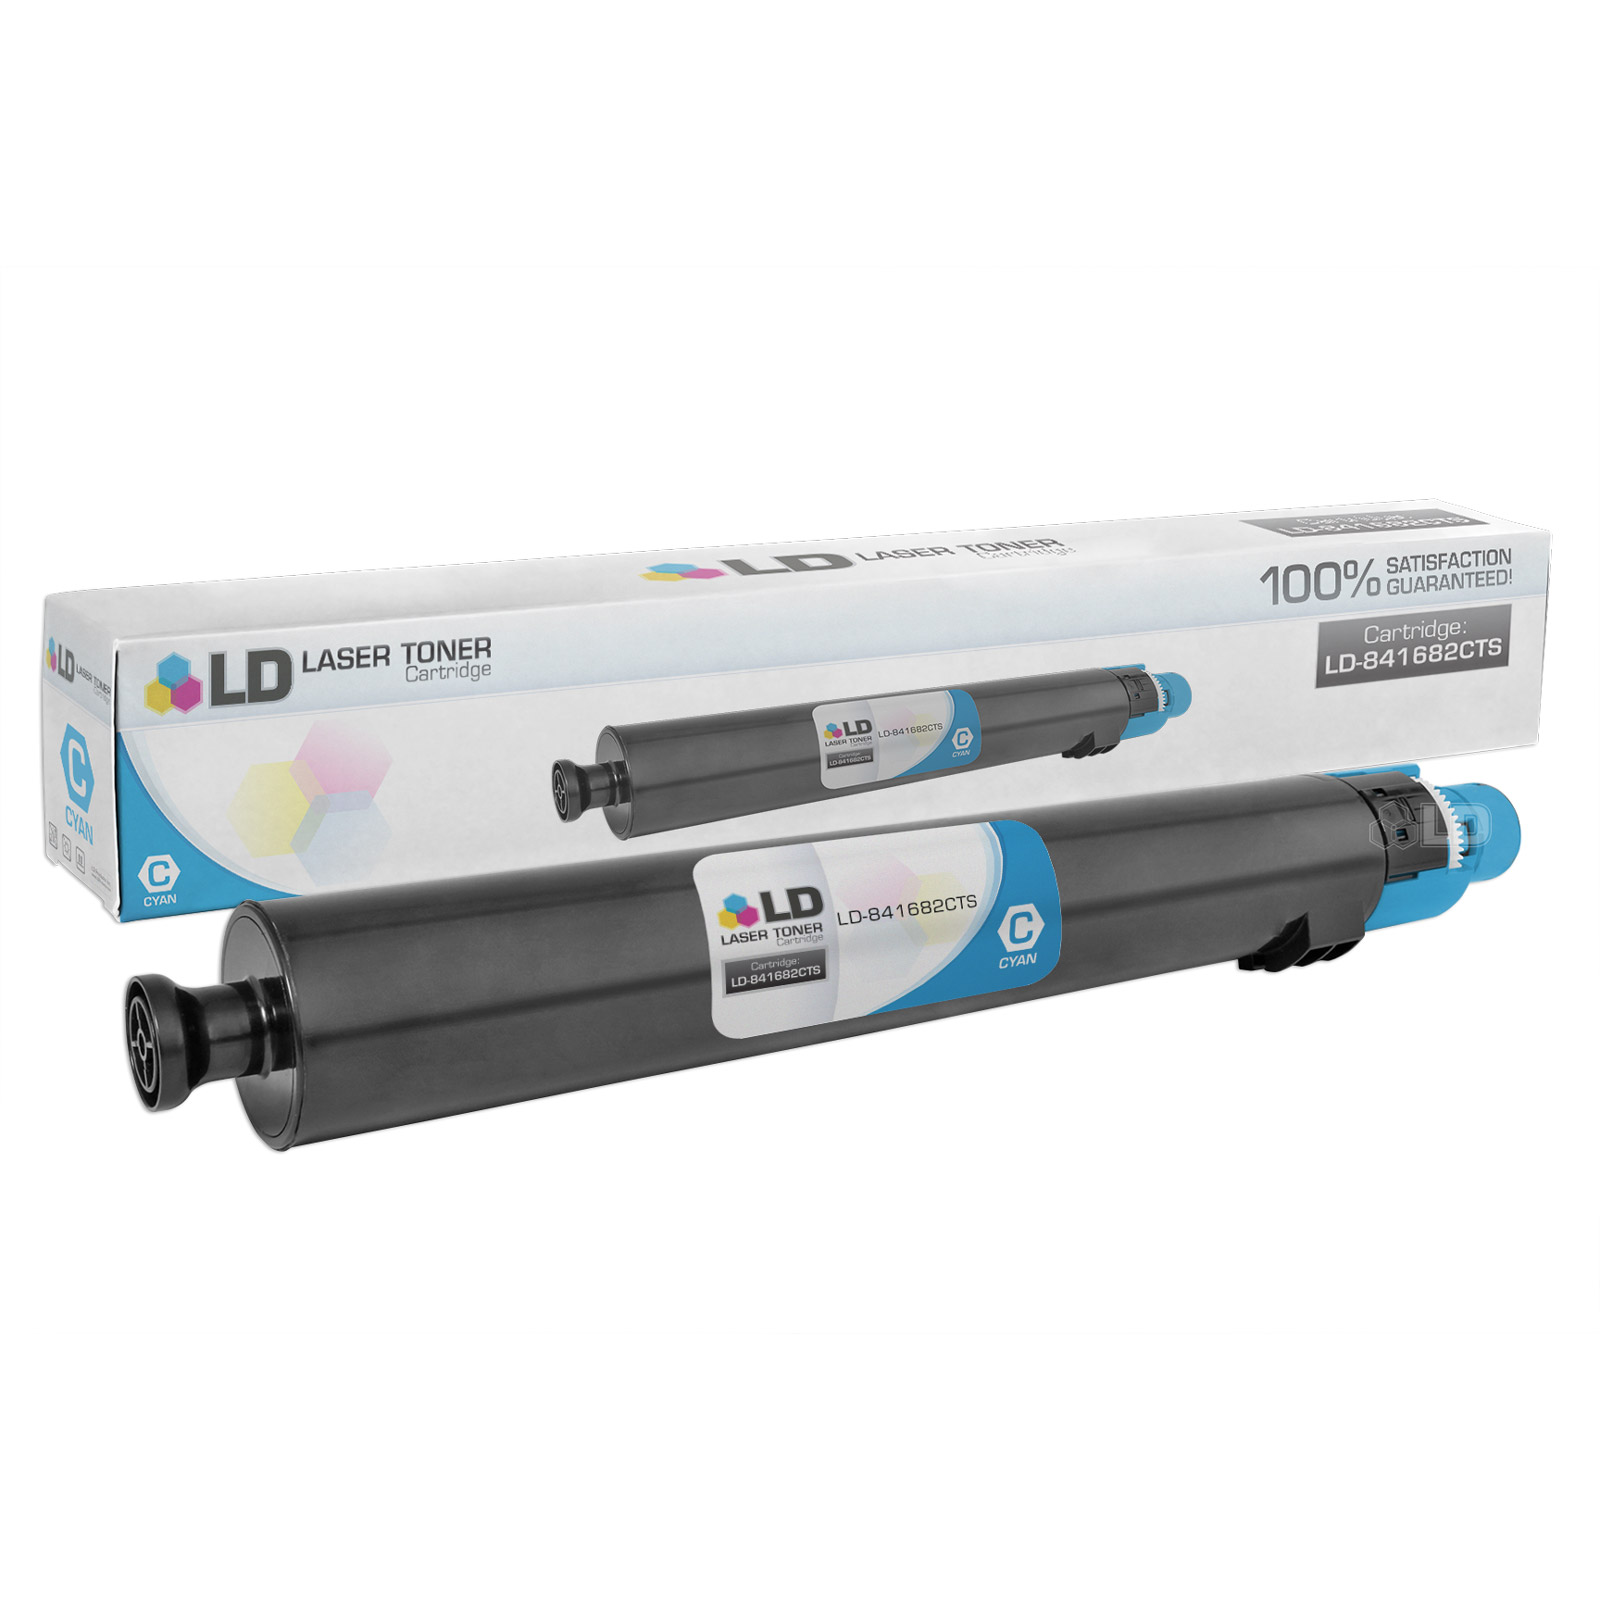 LD Compatible Replacement for Ricoh 841682 (841754) Cyan Laser Toner Cartridge for use in Ricoh Aficio, Savin, and Lanier MP C4502, MP C4502A, MP C5502, and MP C5502A s - image 1 of 1